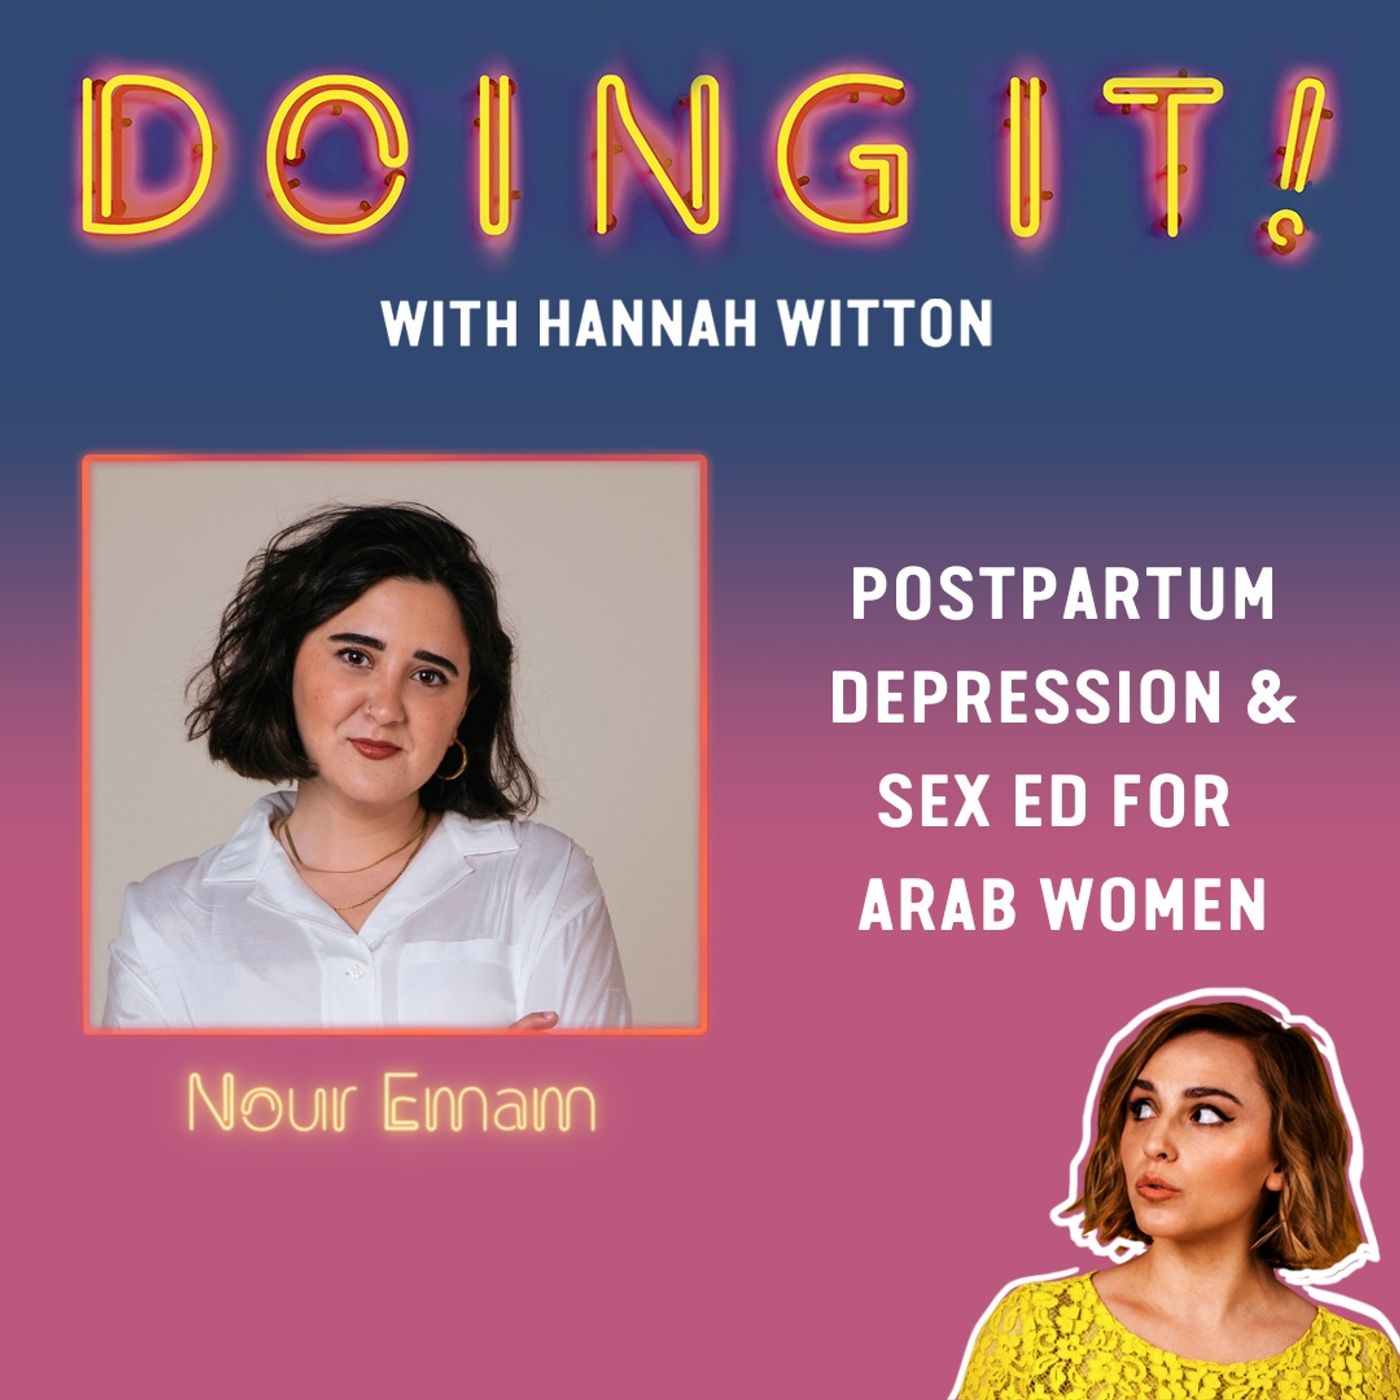 Postpartum Depression And Sex Ed For Arab Women With Nour Emam From Doing It With Hannah Witton